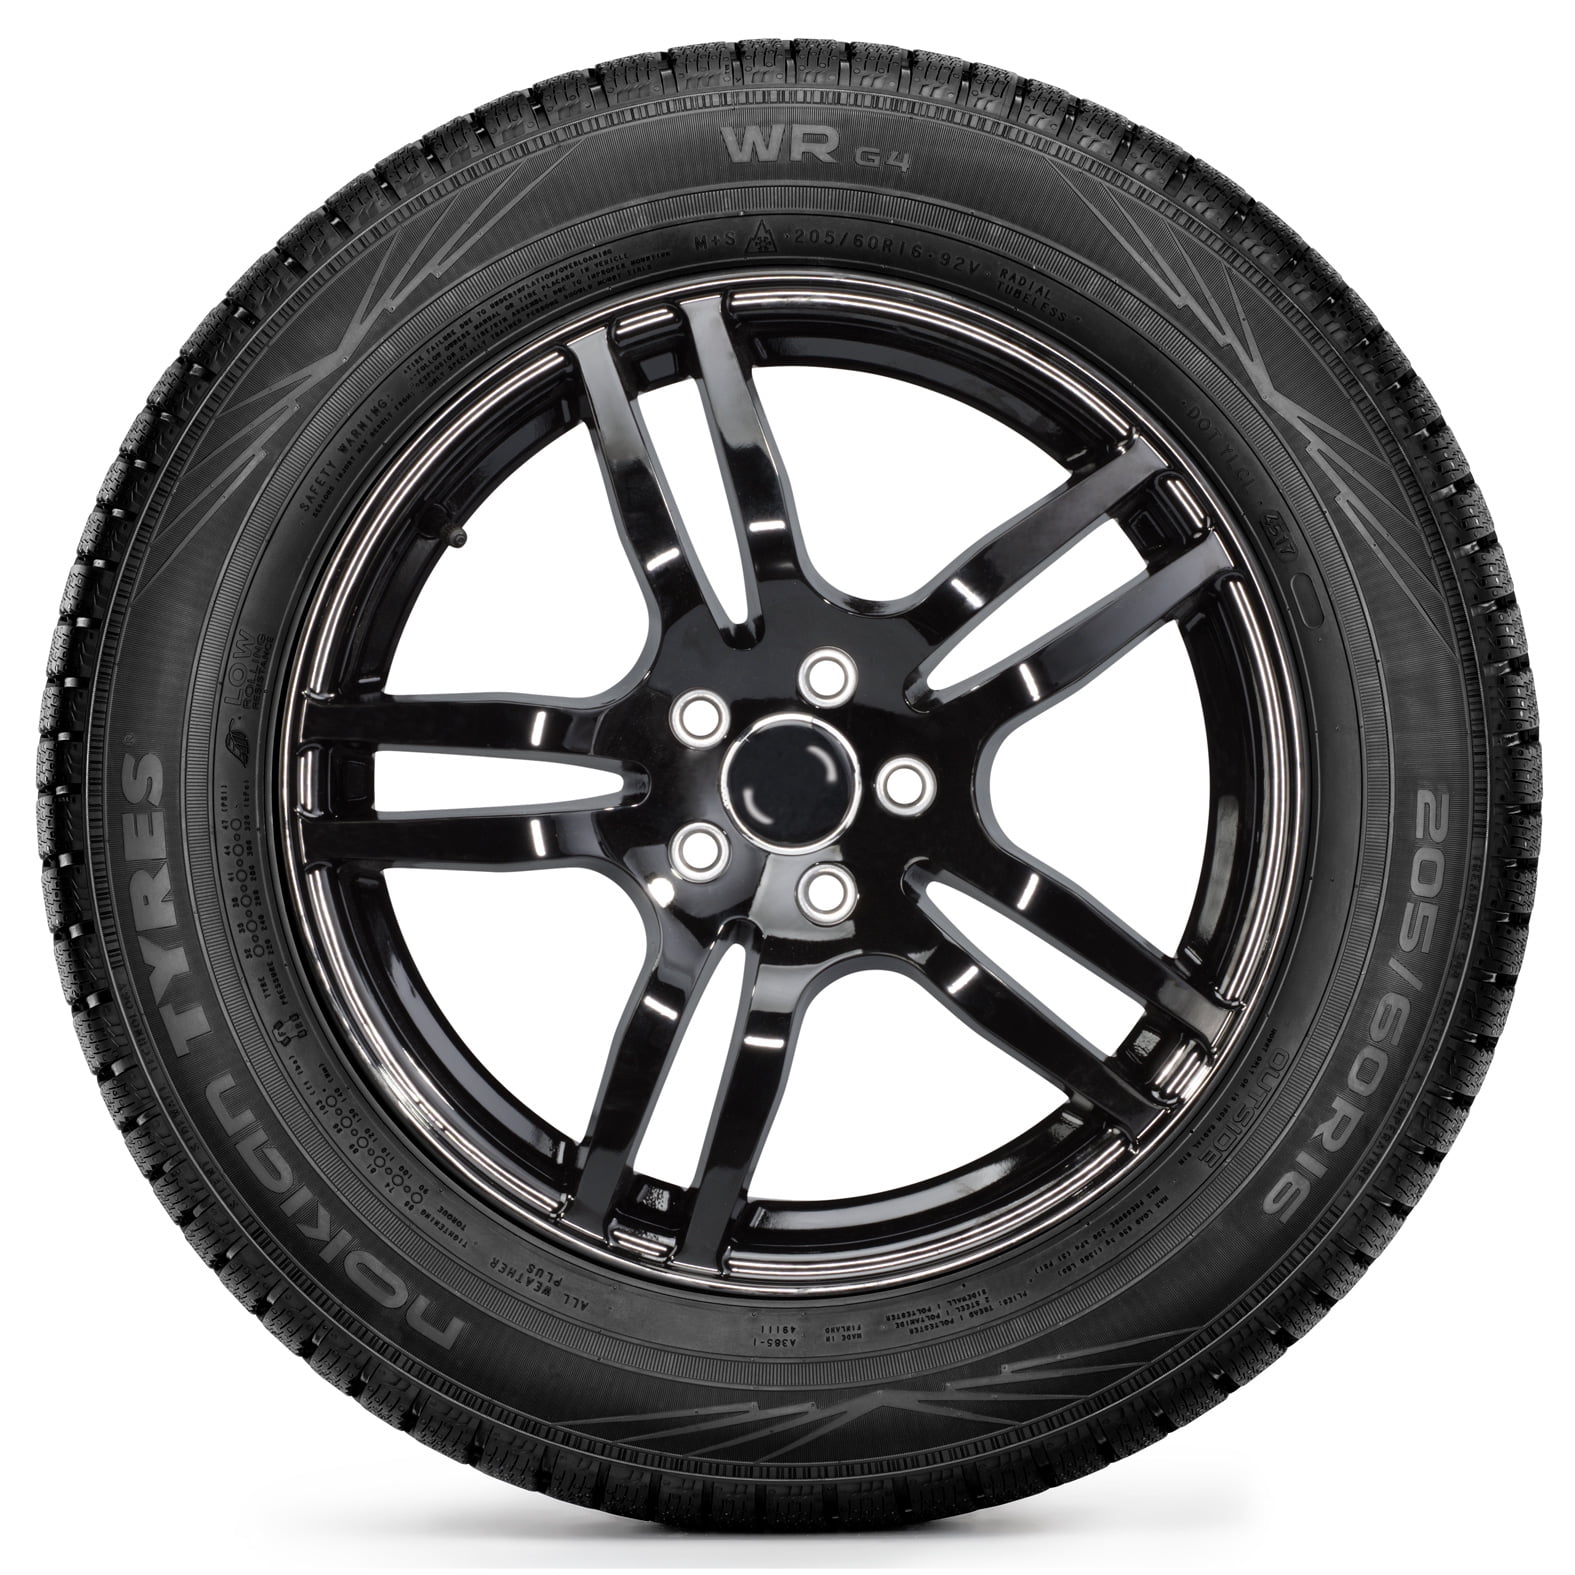 Nokian WR G4 SUV All Weather 225/65R17 106H XL SUV/Crossover Tire